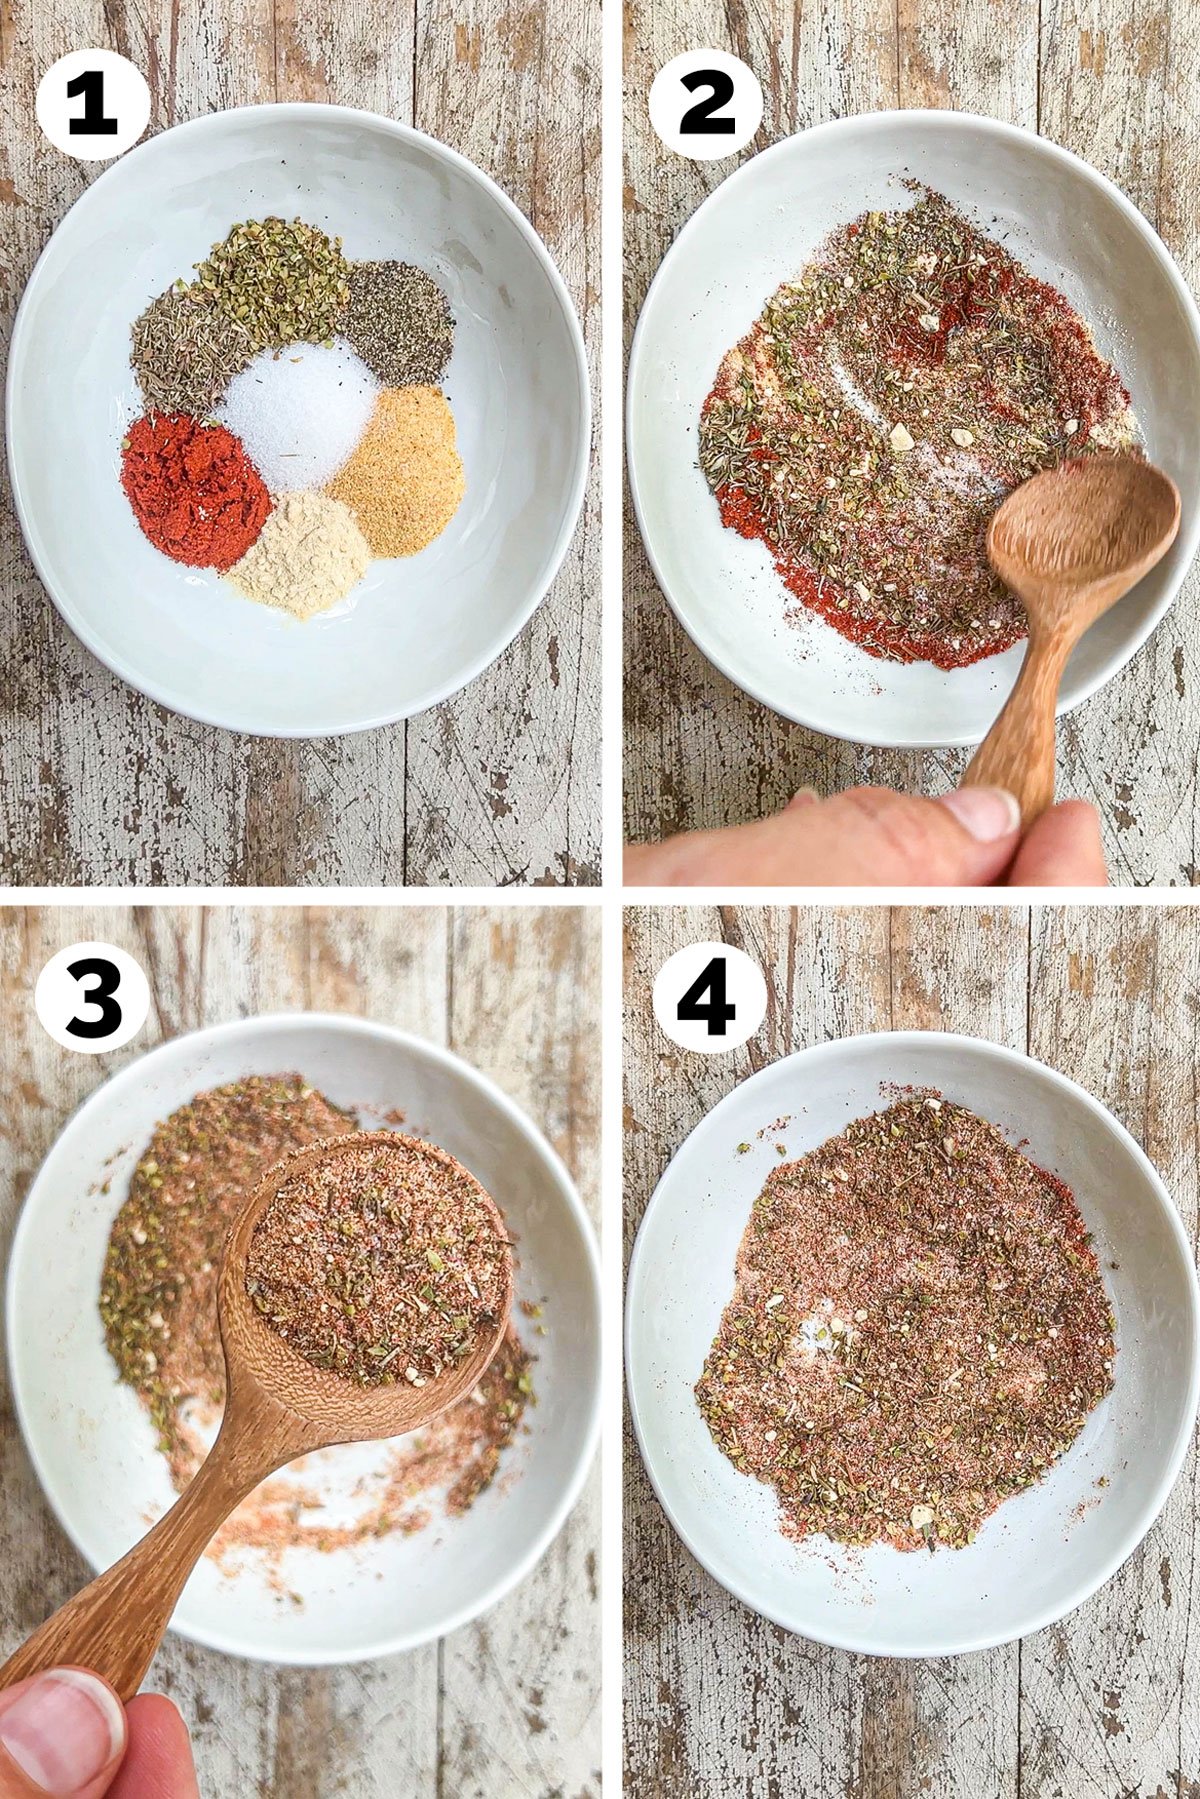 Process photos for how to make ground turkey seasoning. Add spices to bowl. Mix. Then store in an airtight container.